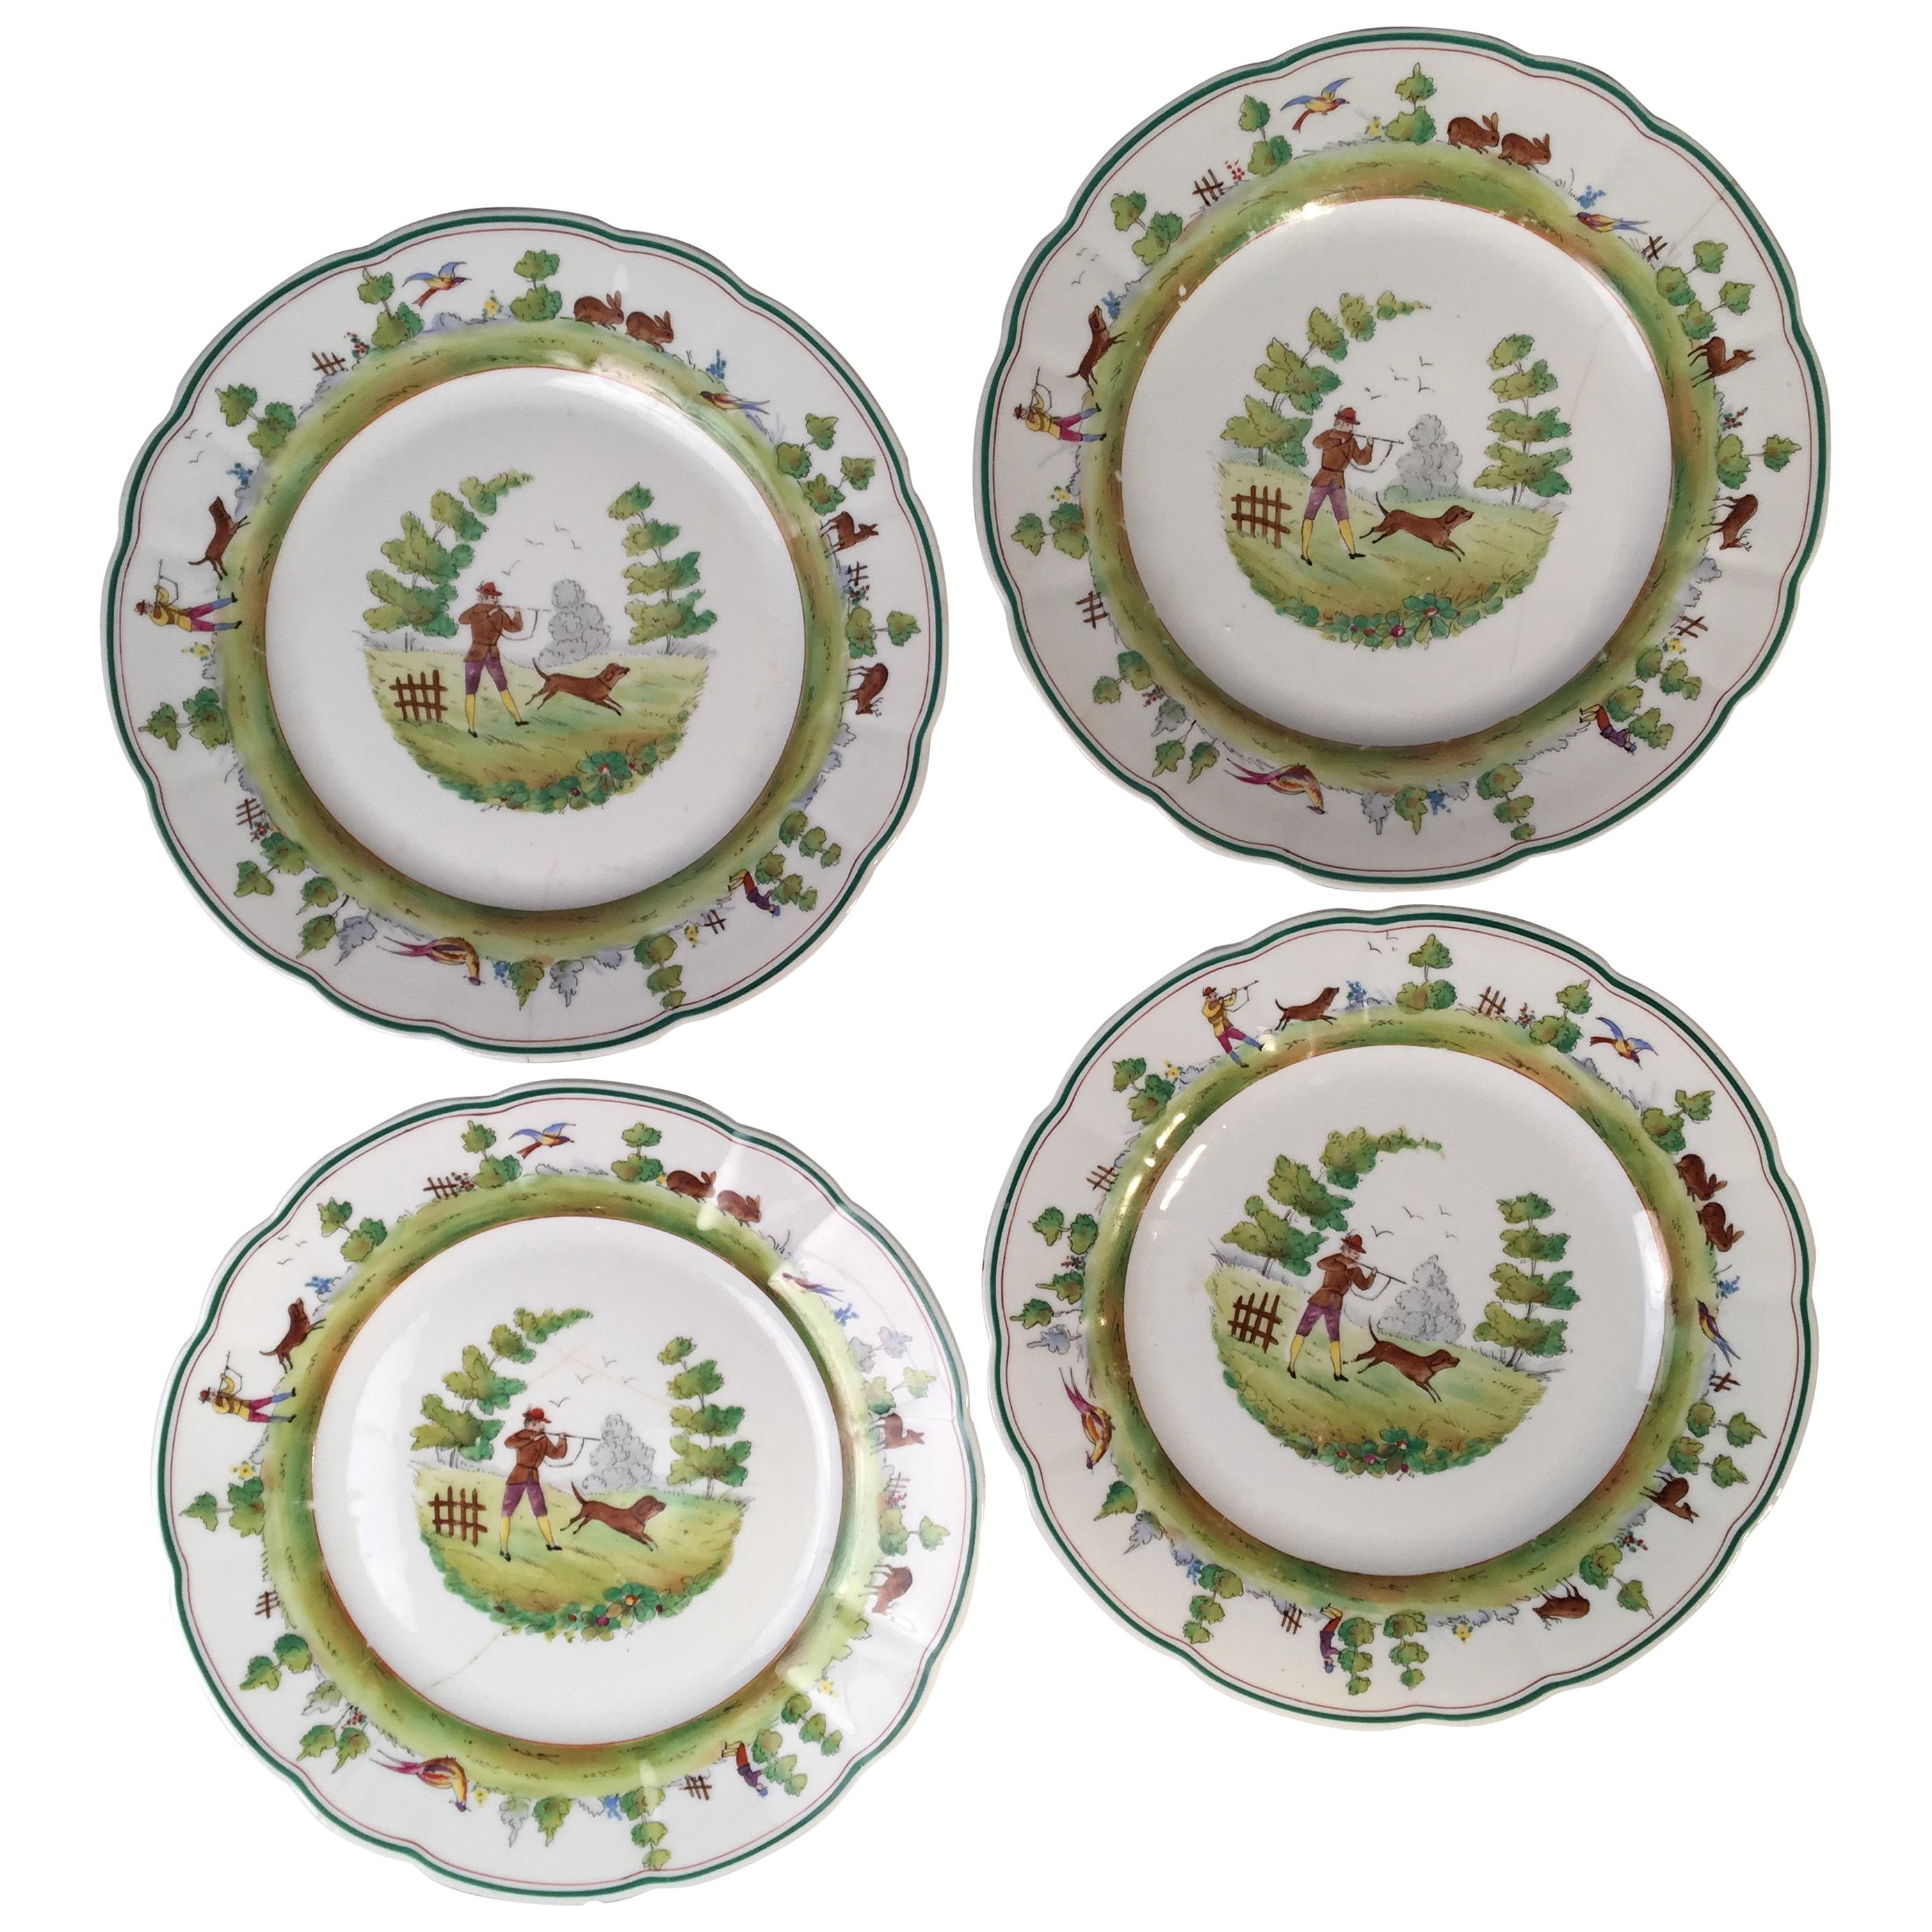 Set of 4 Vintage Cowell and Hubbard Plates, Hunting Theme